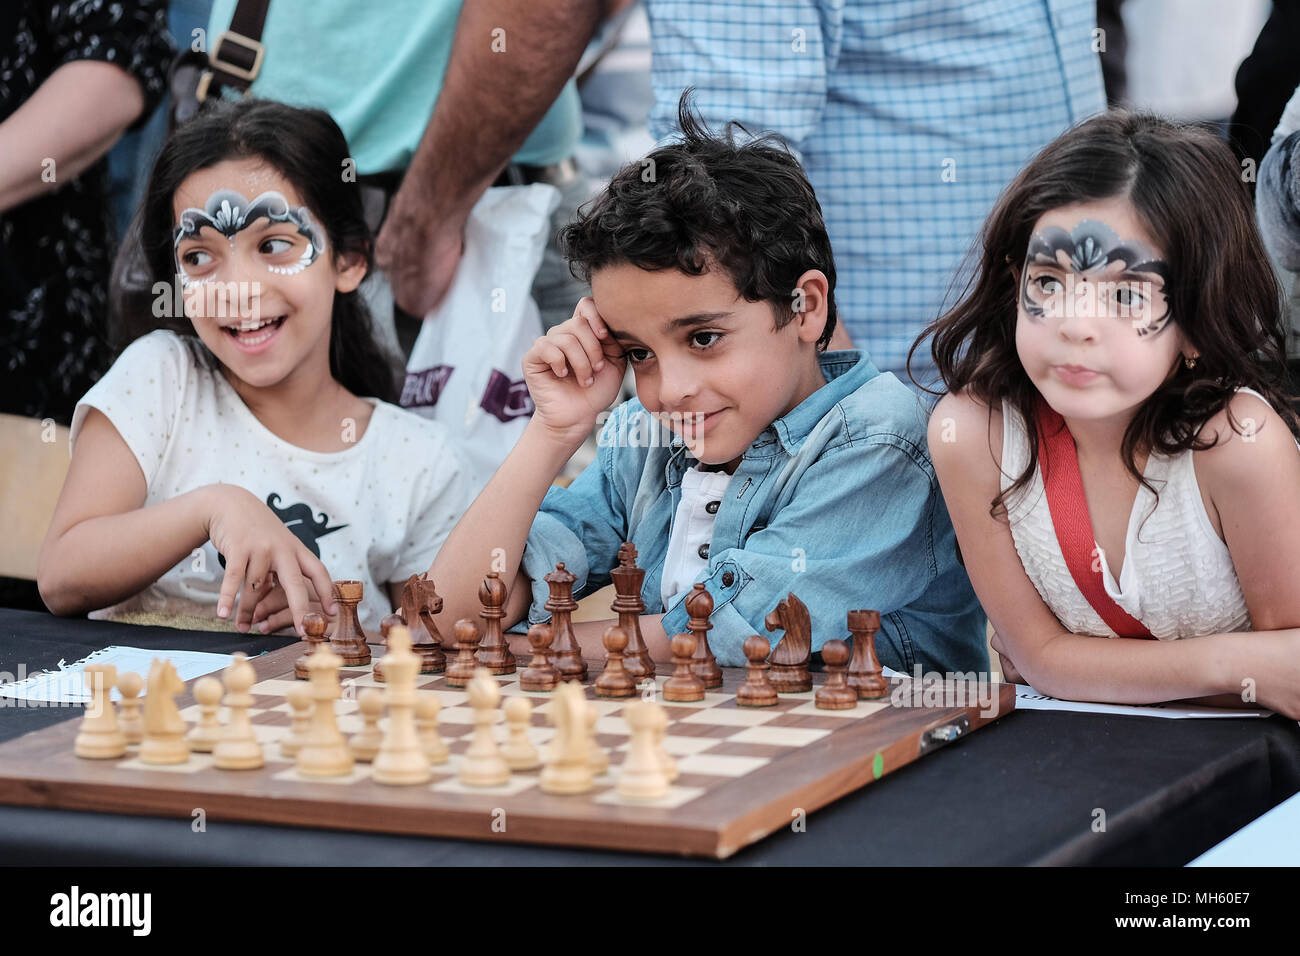 Jerusalem, Israel. 30th April, 2018. YEHONATAN AZULAI (C), 8, awaits the opening of a chess game against Viswanathan 'Vishy' Anand, 49, Indian chess grandmaster, who is about to play chess against dozens of Israeli youth champions simultaneously at the Jaffa Gate in the framework of Israel's 70th Independence Day celebrations. Credit: Nir Alon/Alamy Live News Stock Photo